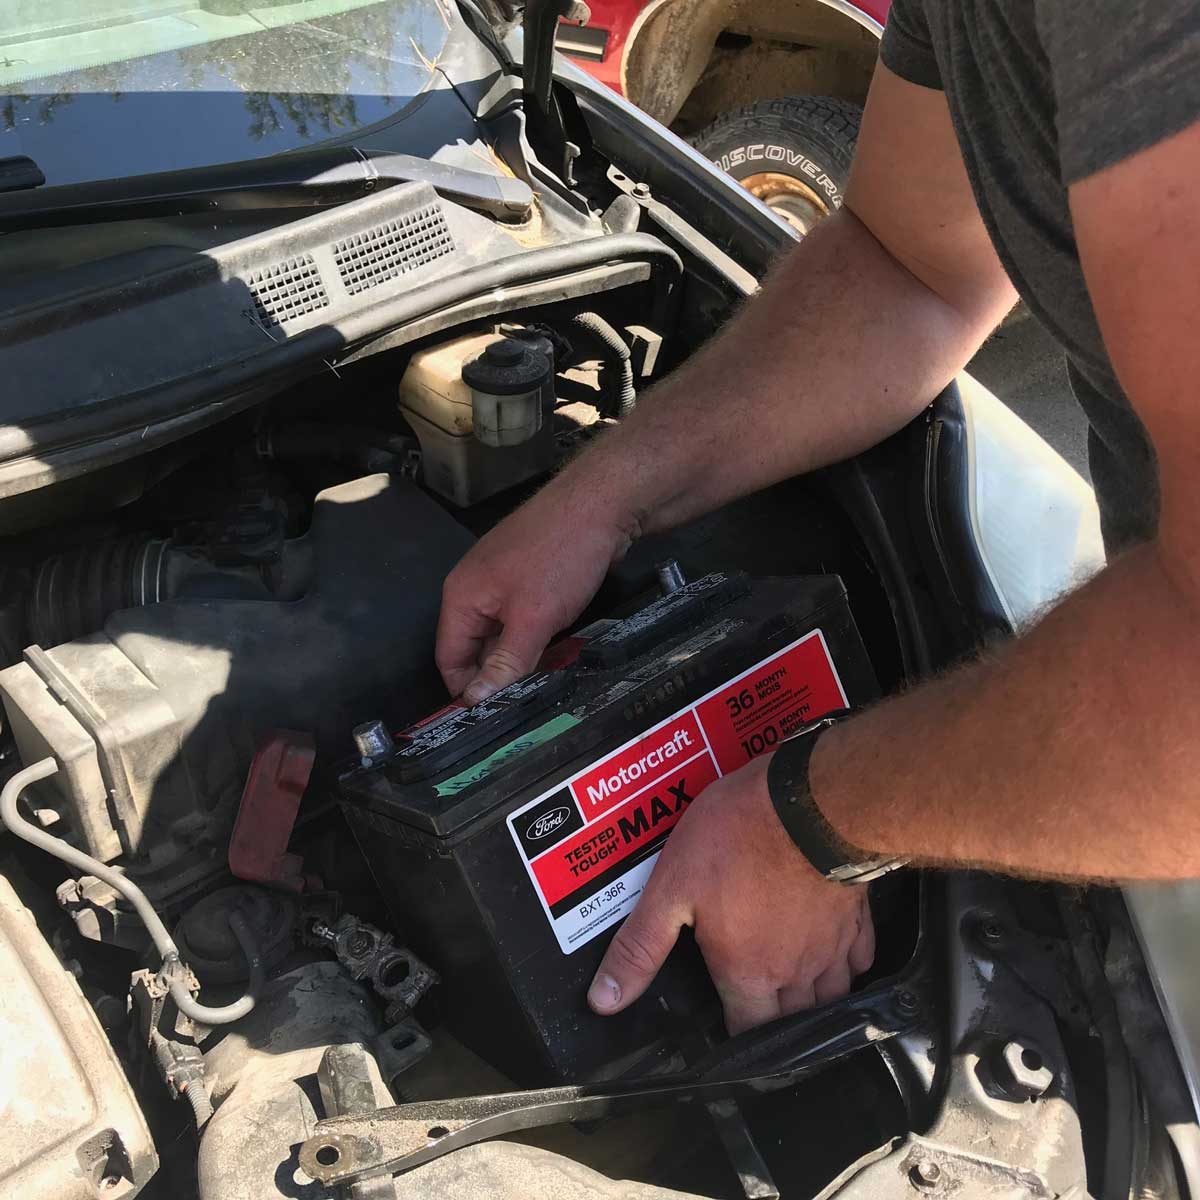 How to Disconnect a Car Battery Safely